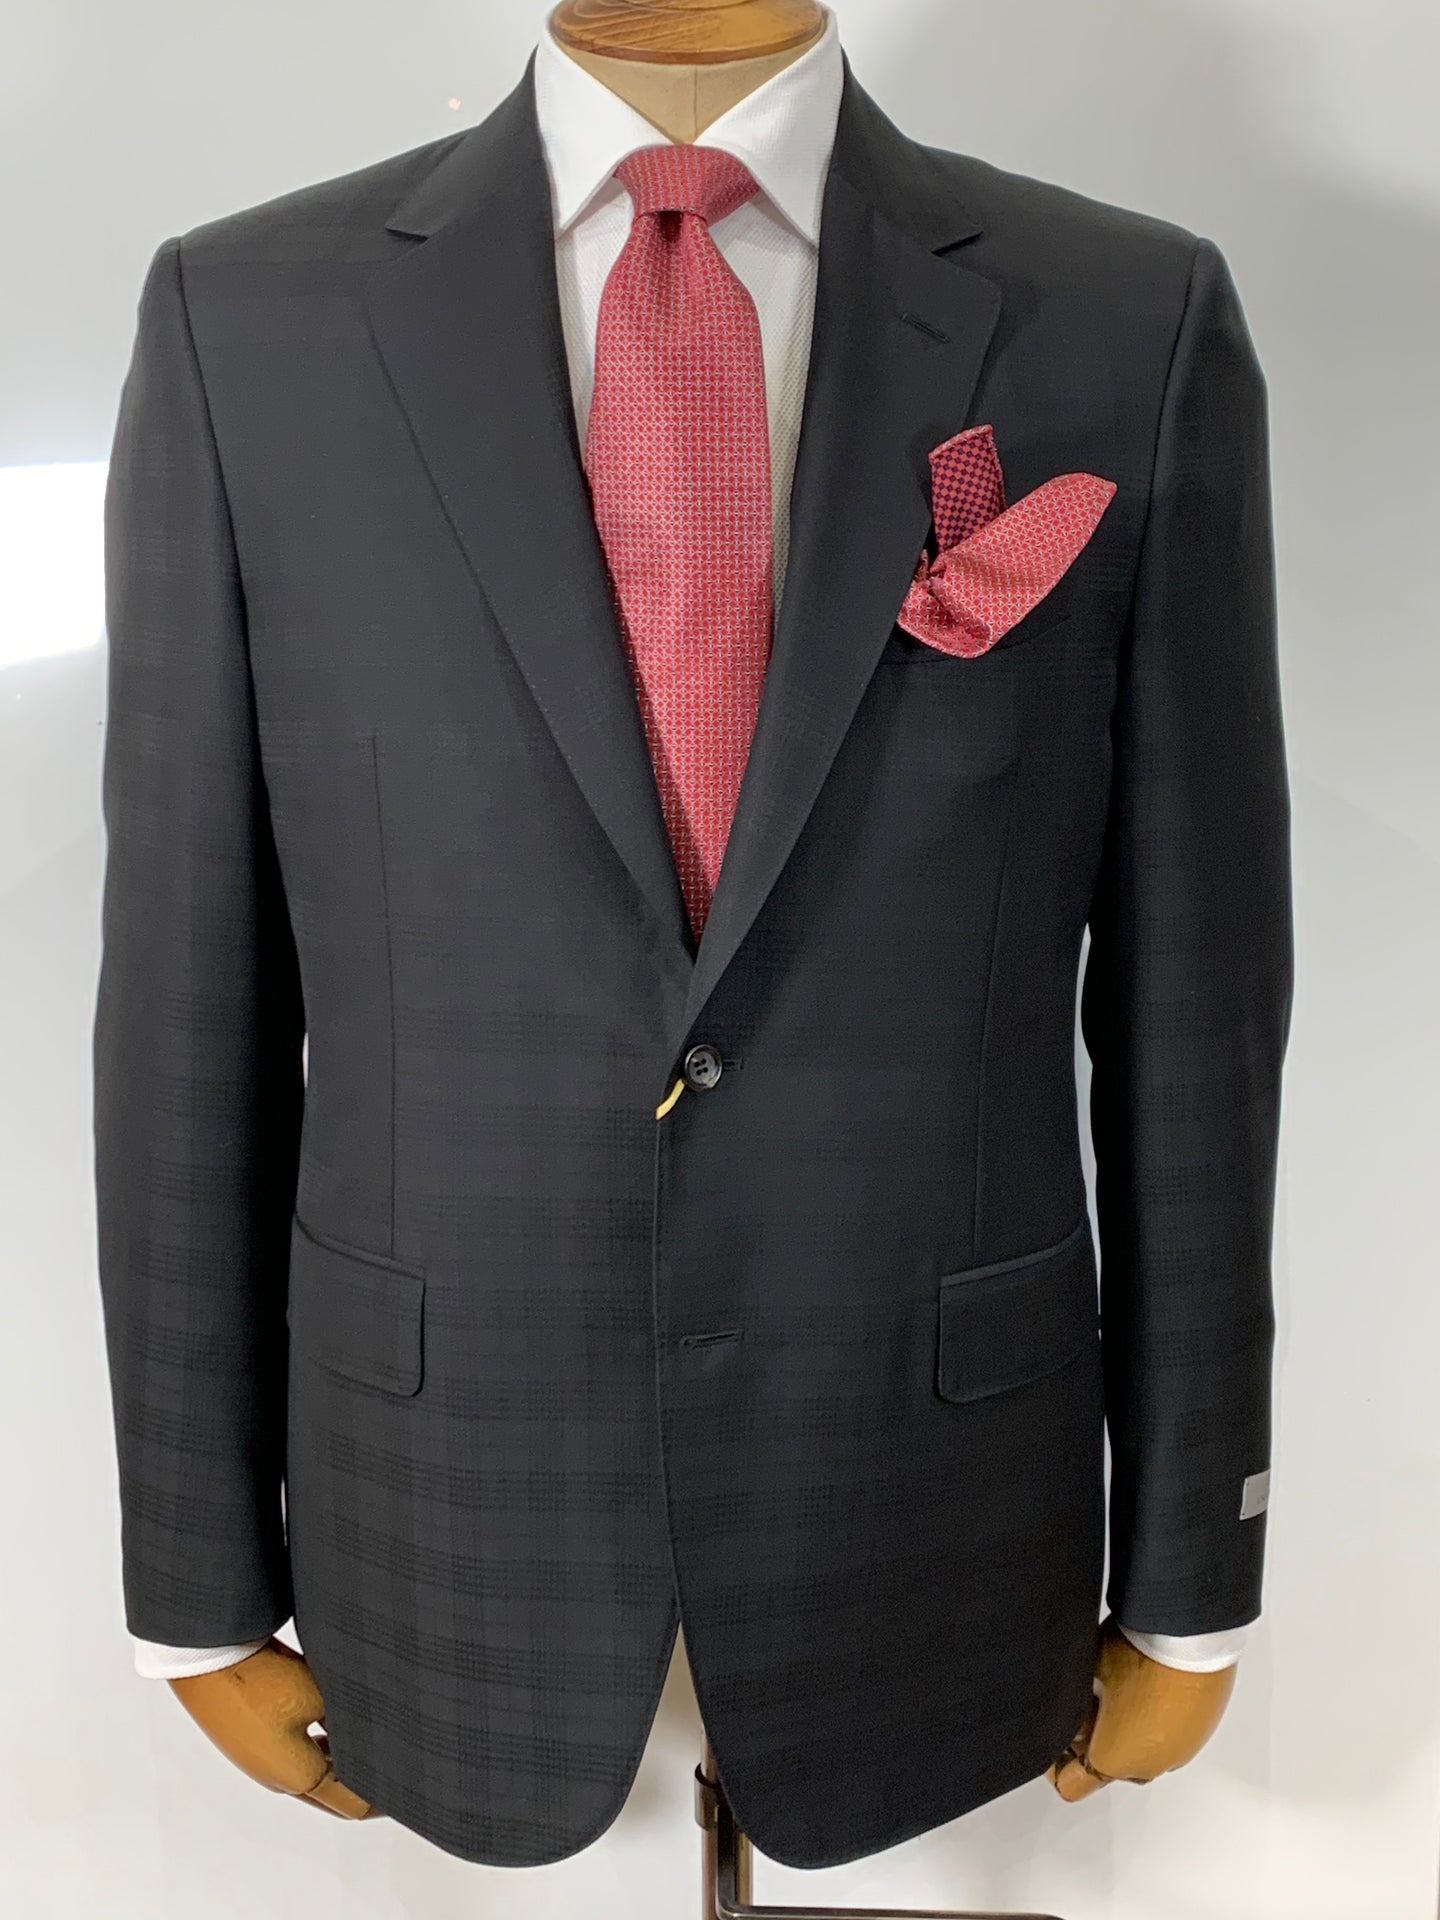 CONTEMPORY CHARCOAL SUIT BF02920/101 WINDOW PANE CHARCOAL WINDOW PAINED